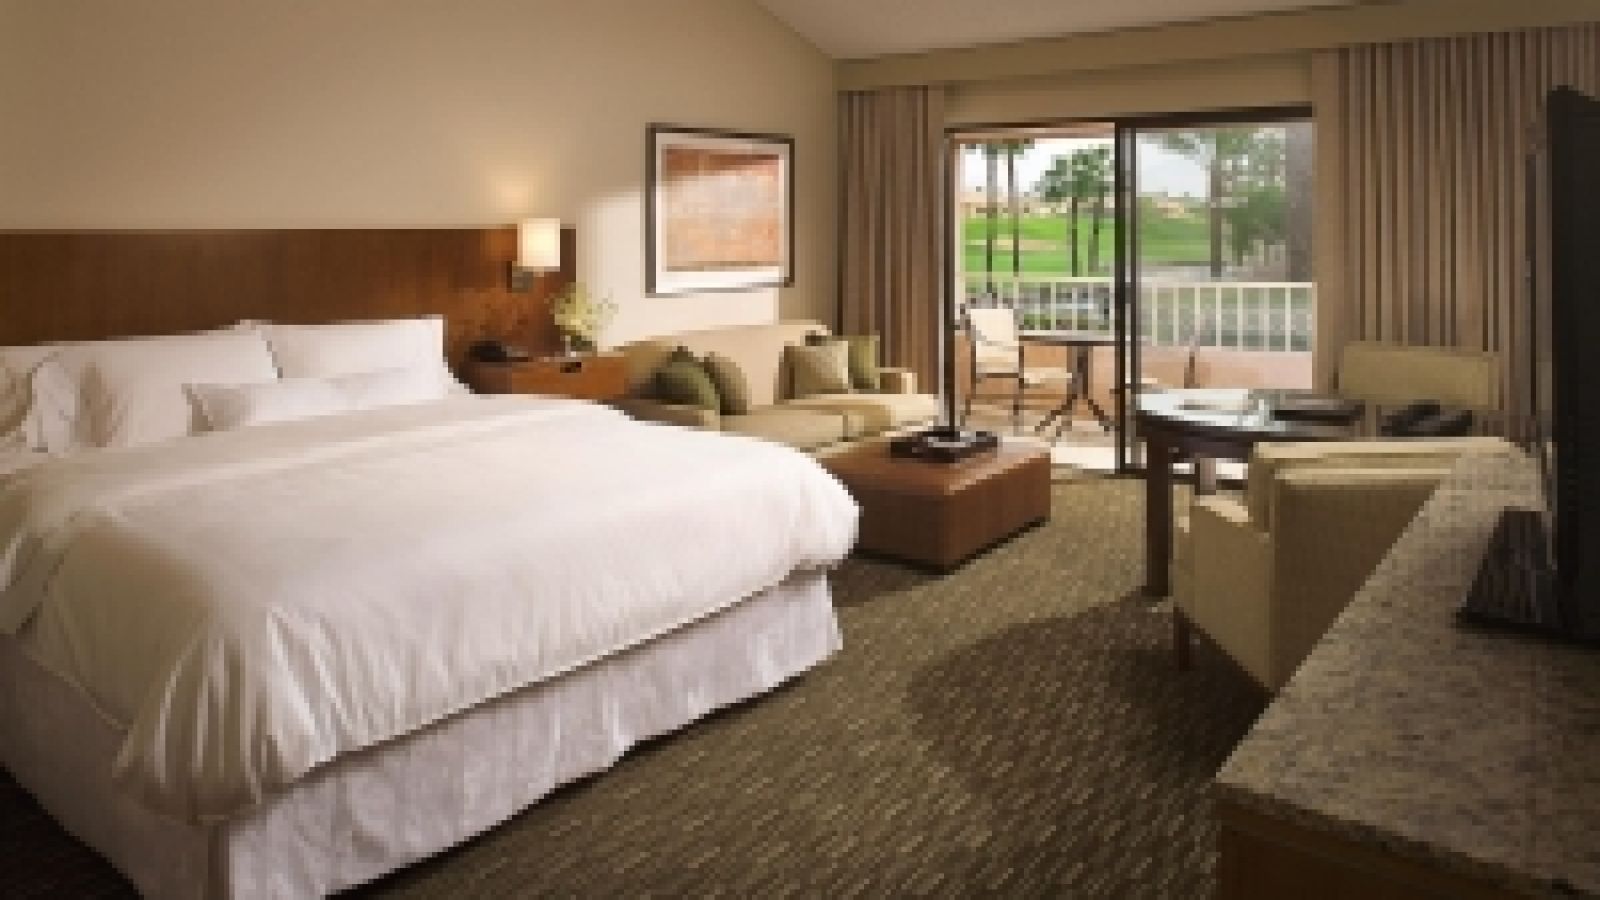 Westin Mission Hills Resort and Spa - Palm Springs golf packages